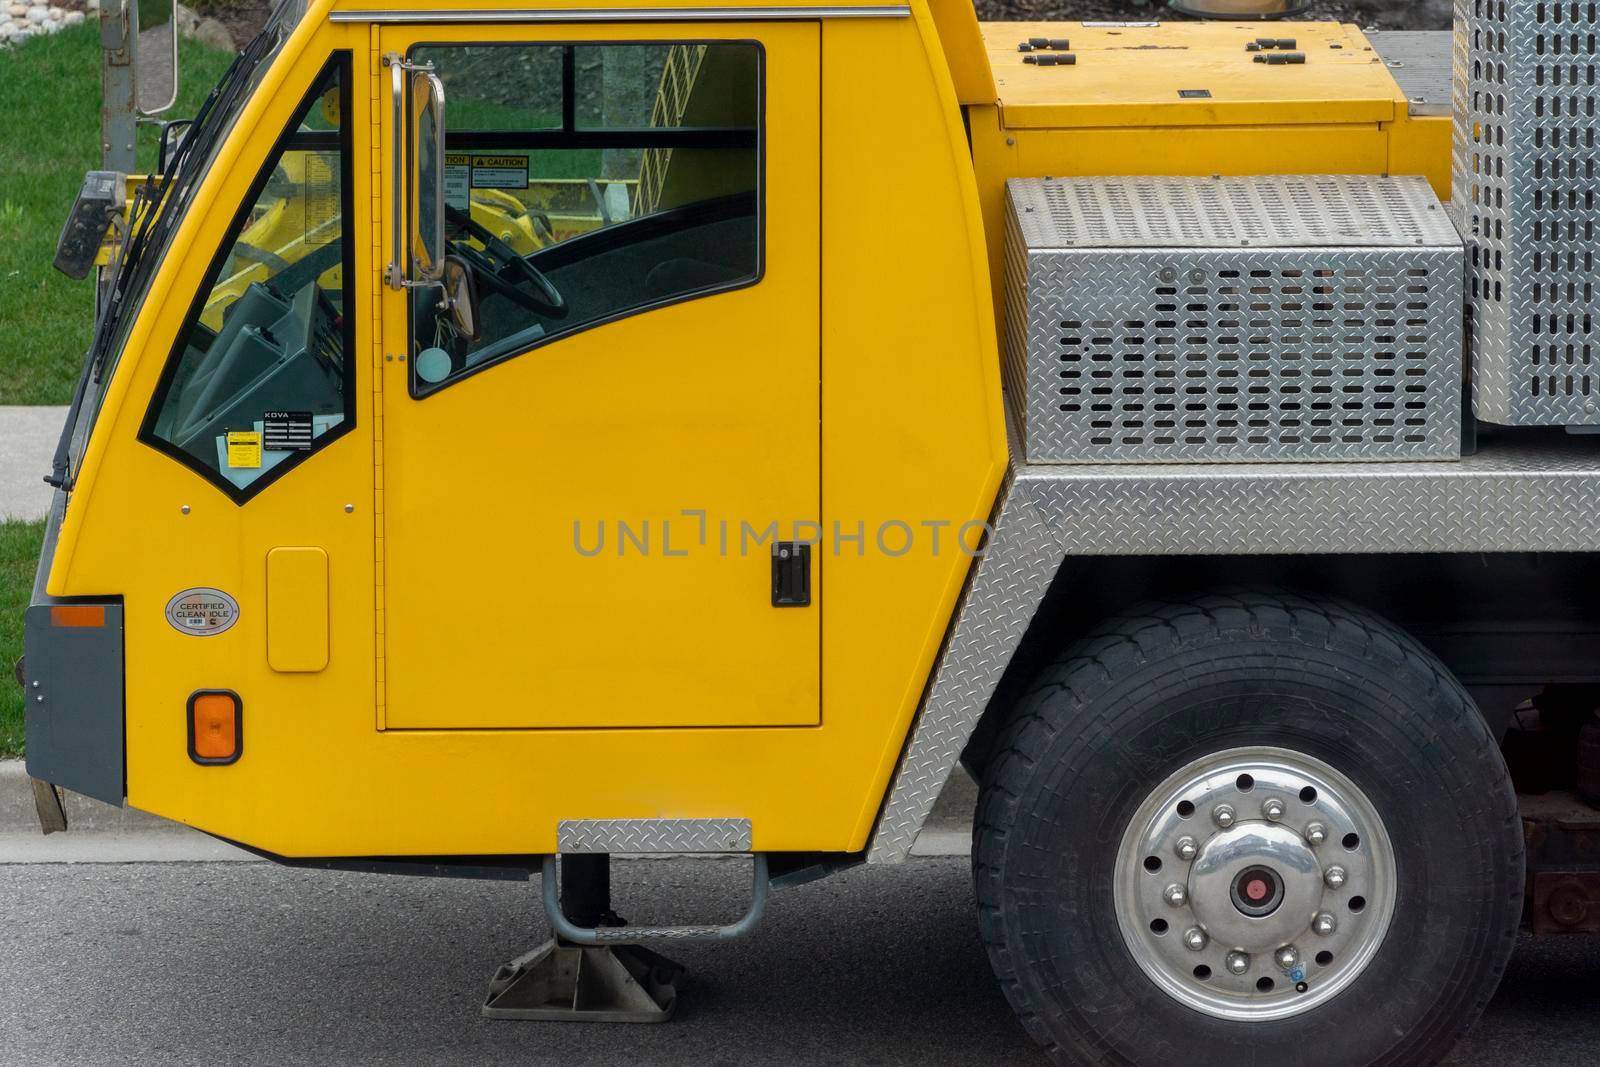 Fragment of a yellow truck crane cab, with a front wheel on the driver's side